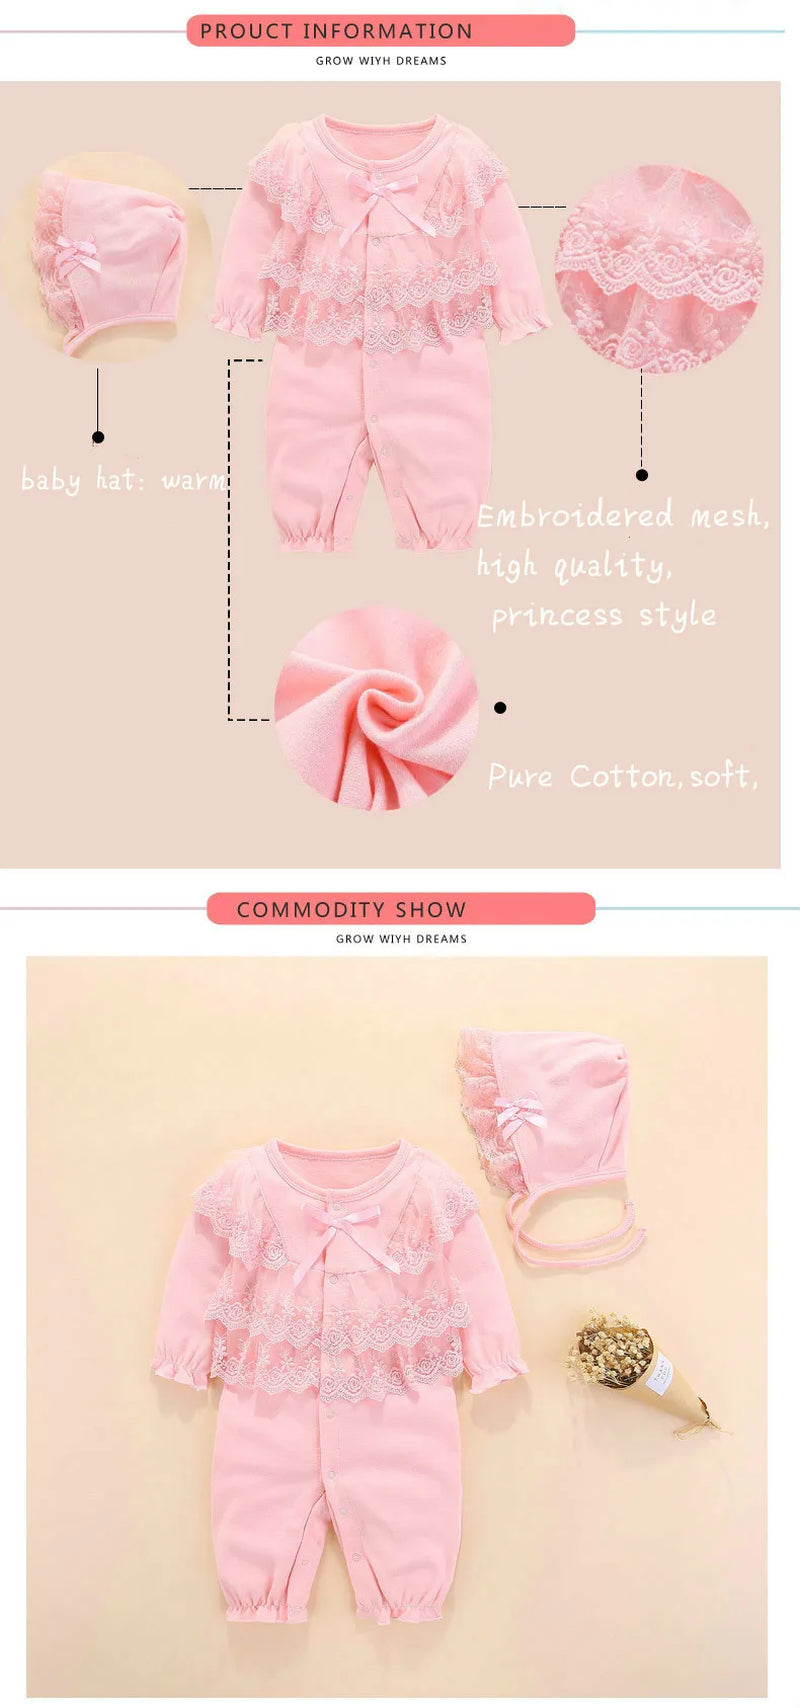 New Newborn Baby Girls Clothes Cotton Long Sleeve Lace Baby Romper Jumpsuit Cute Baby Girl Outfits Set 0 3 Months Baby Clothing